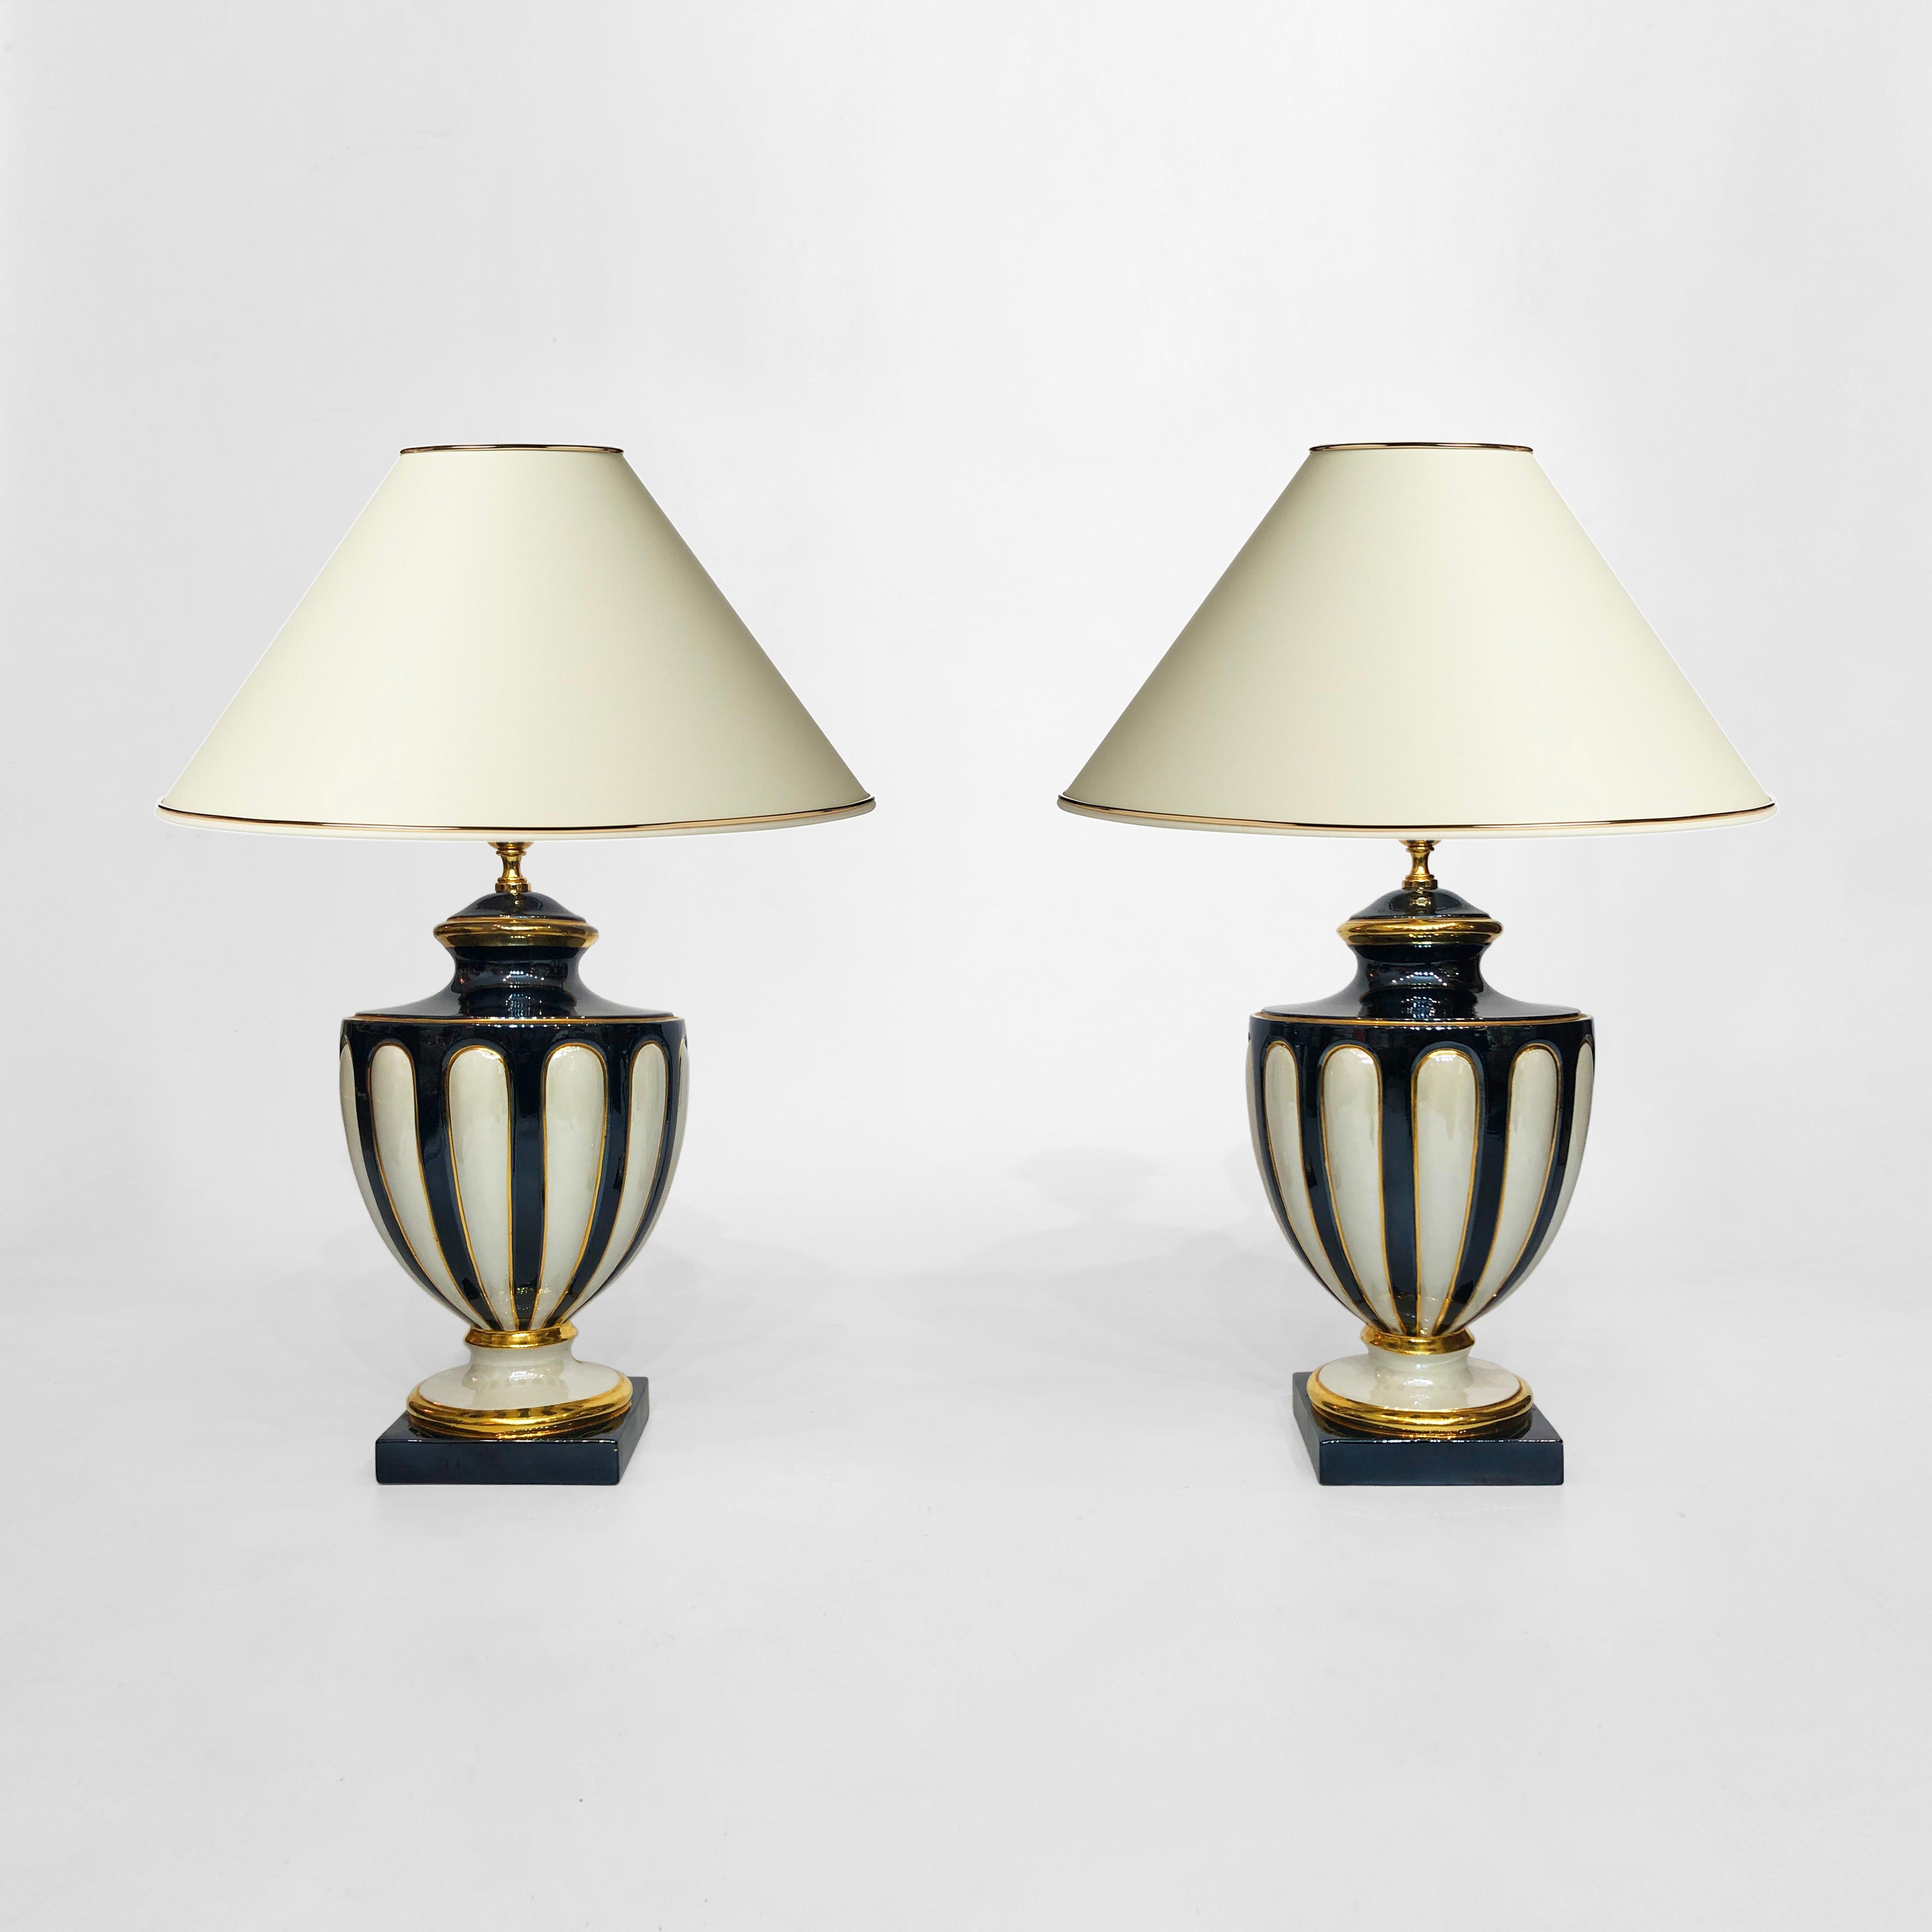 A bold pair of ceramic table lamps from Italy, very much in a neoclassical style and designed towards the end of the 1970s. Taking the form of a trophy urn, these lamps contain many of the usual neoclassical tropes: fluting; an organic, curved form;